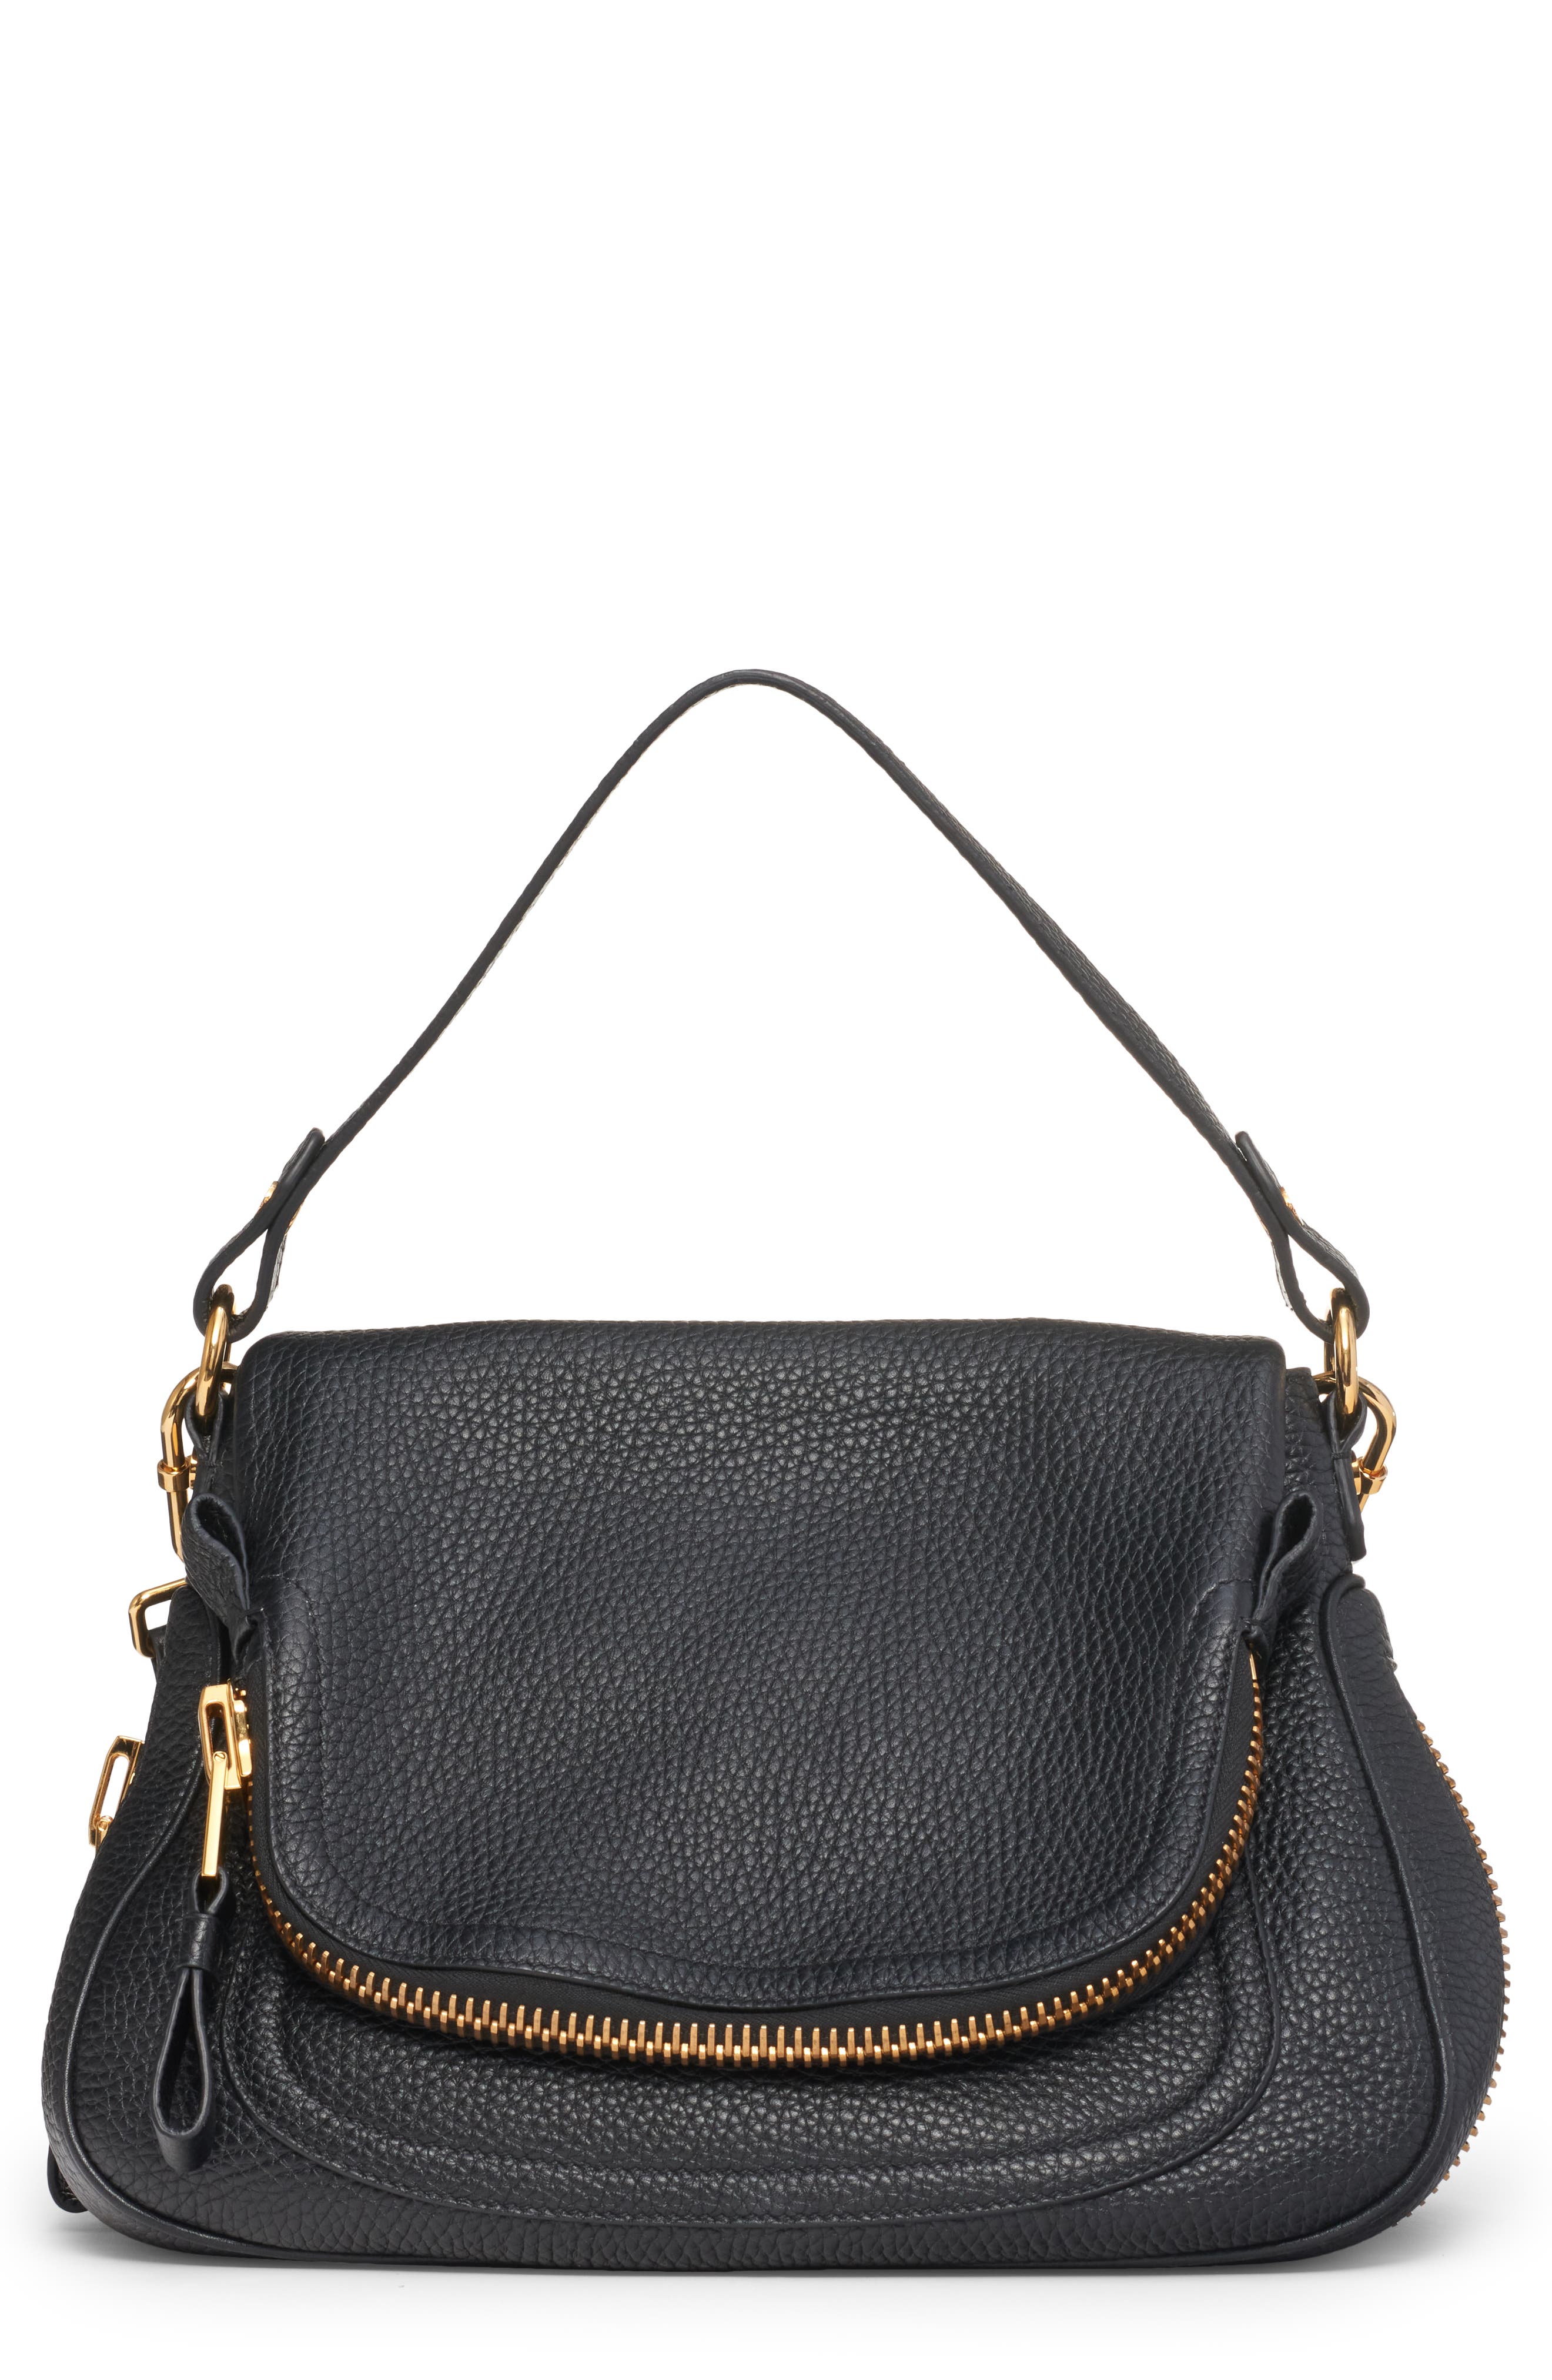 TOM FORD Hand-held leather tote bag - Black